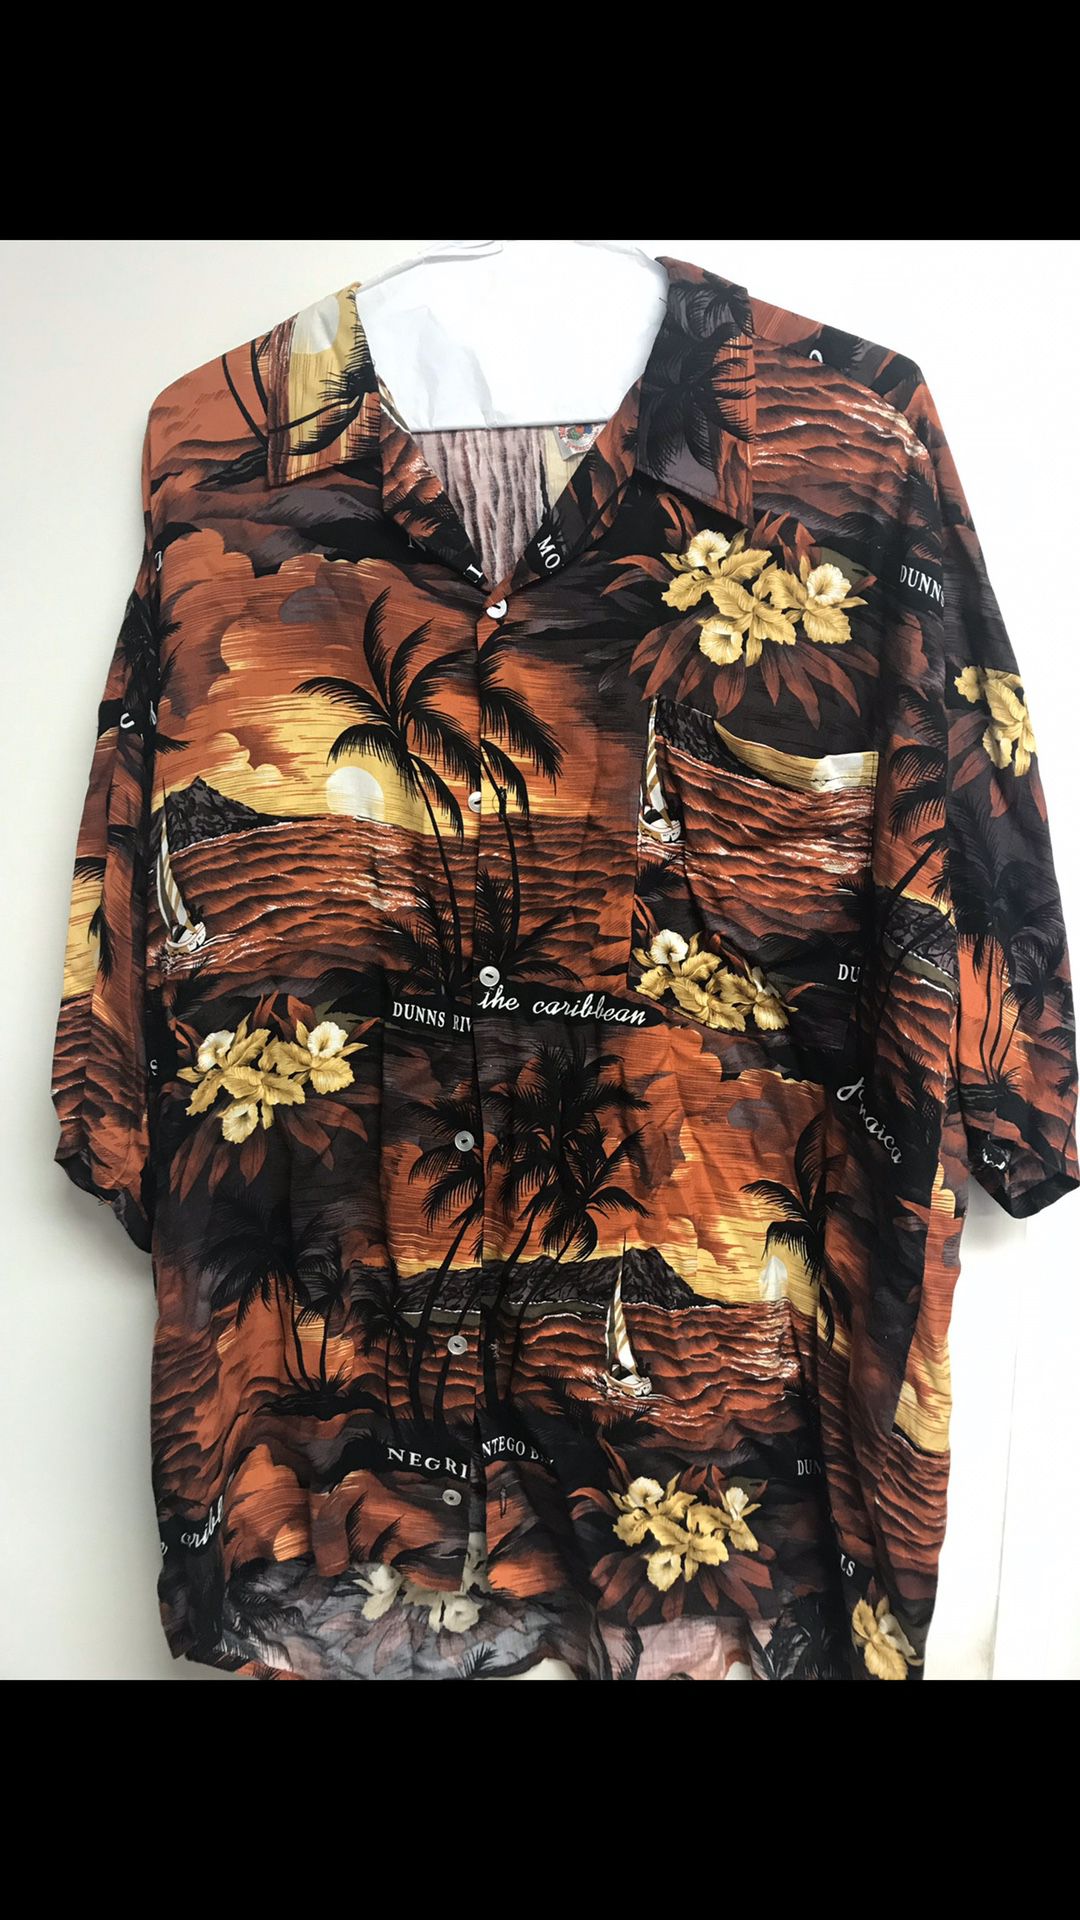 Hawaii shirts 3 different shirts for $25 obo